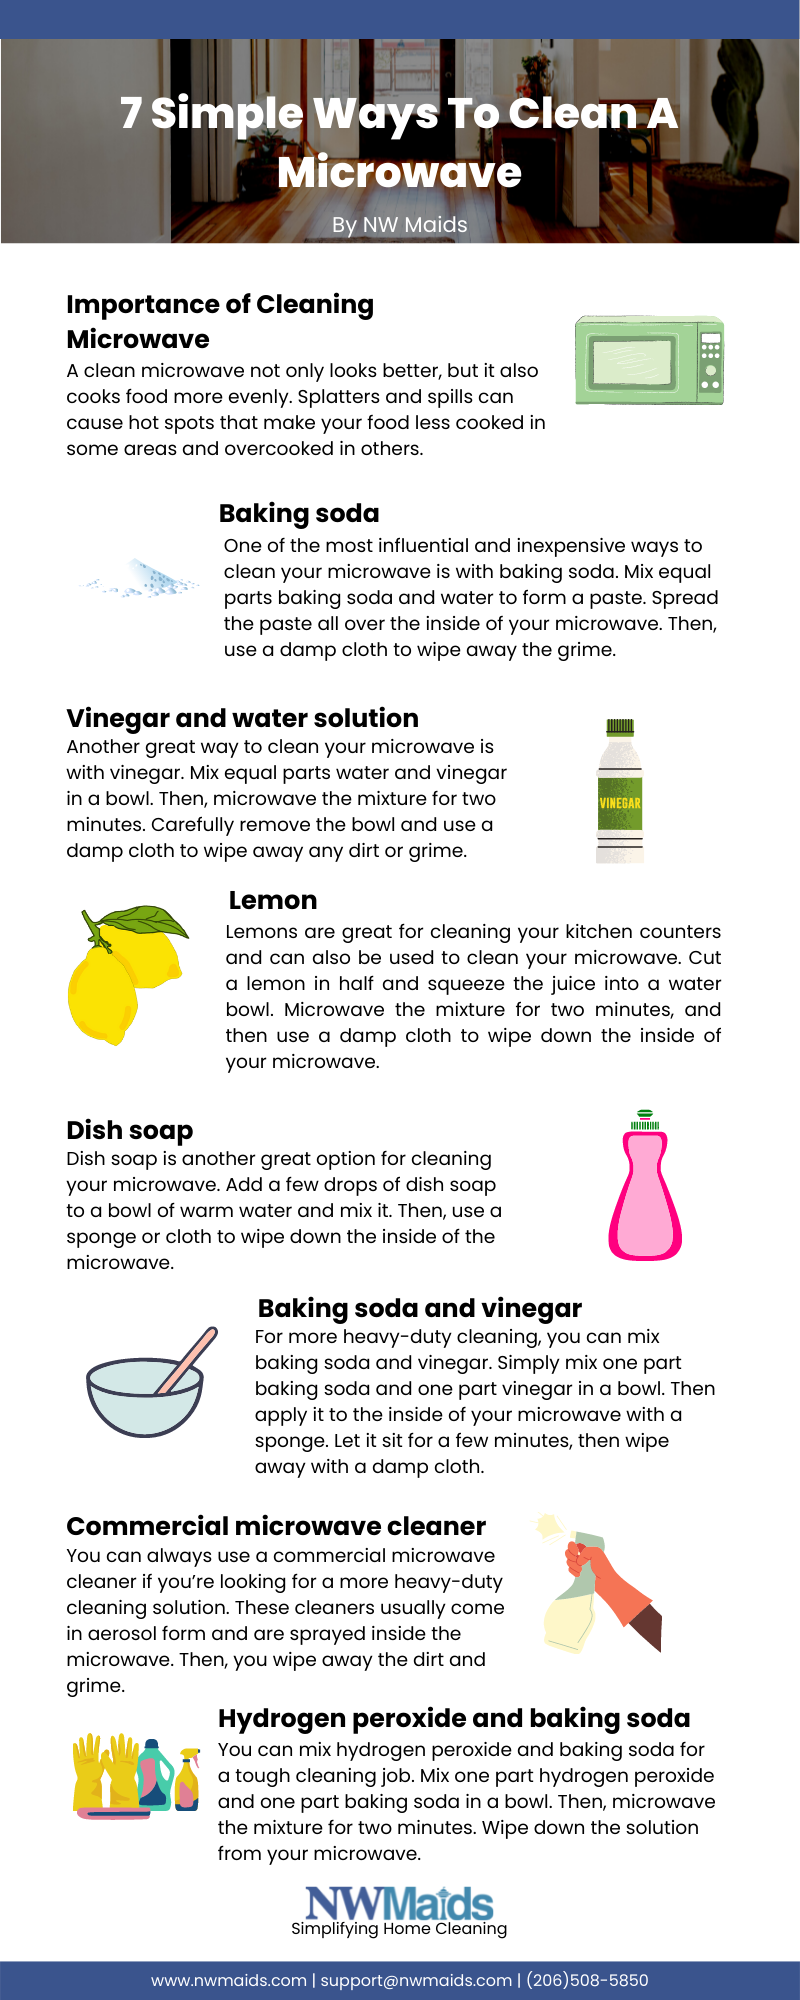 https://nwmaids.com/wp-content/uploads/2022/09/7-simple-ways-to-clean-a-microwave.png